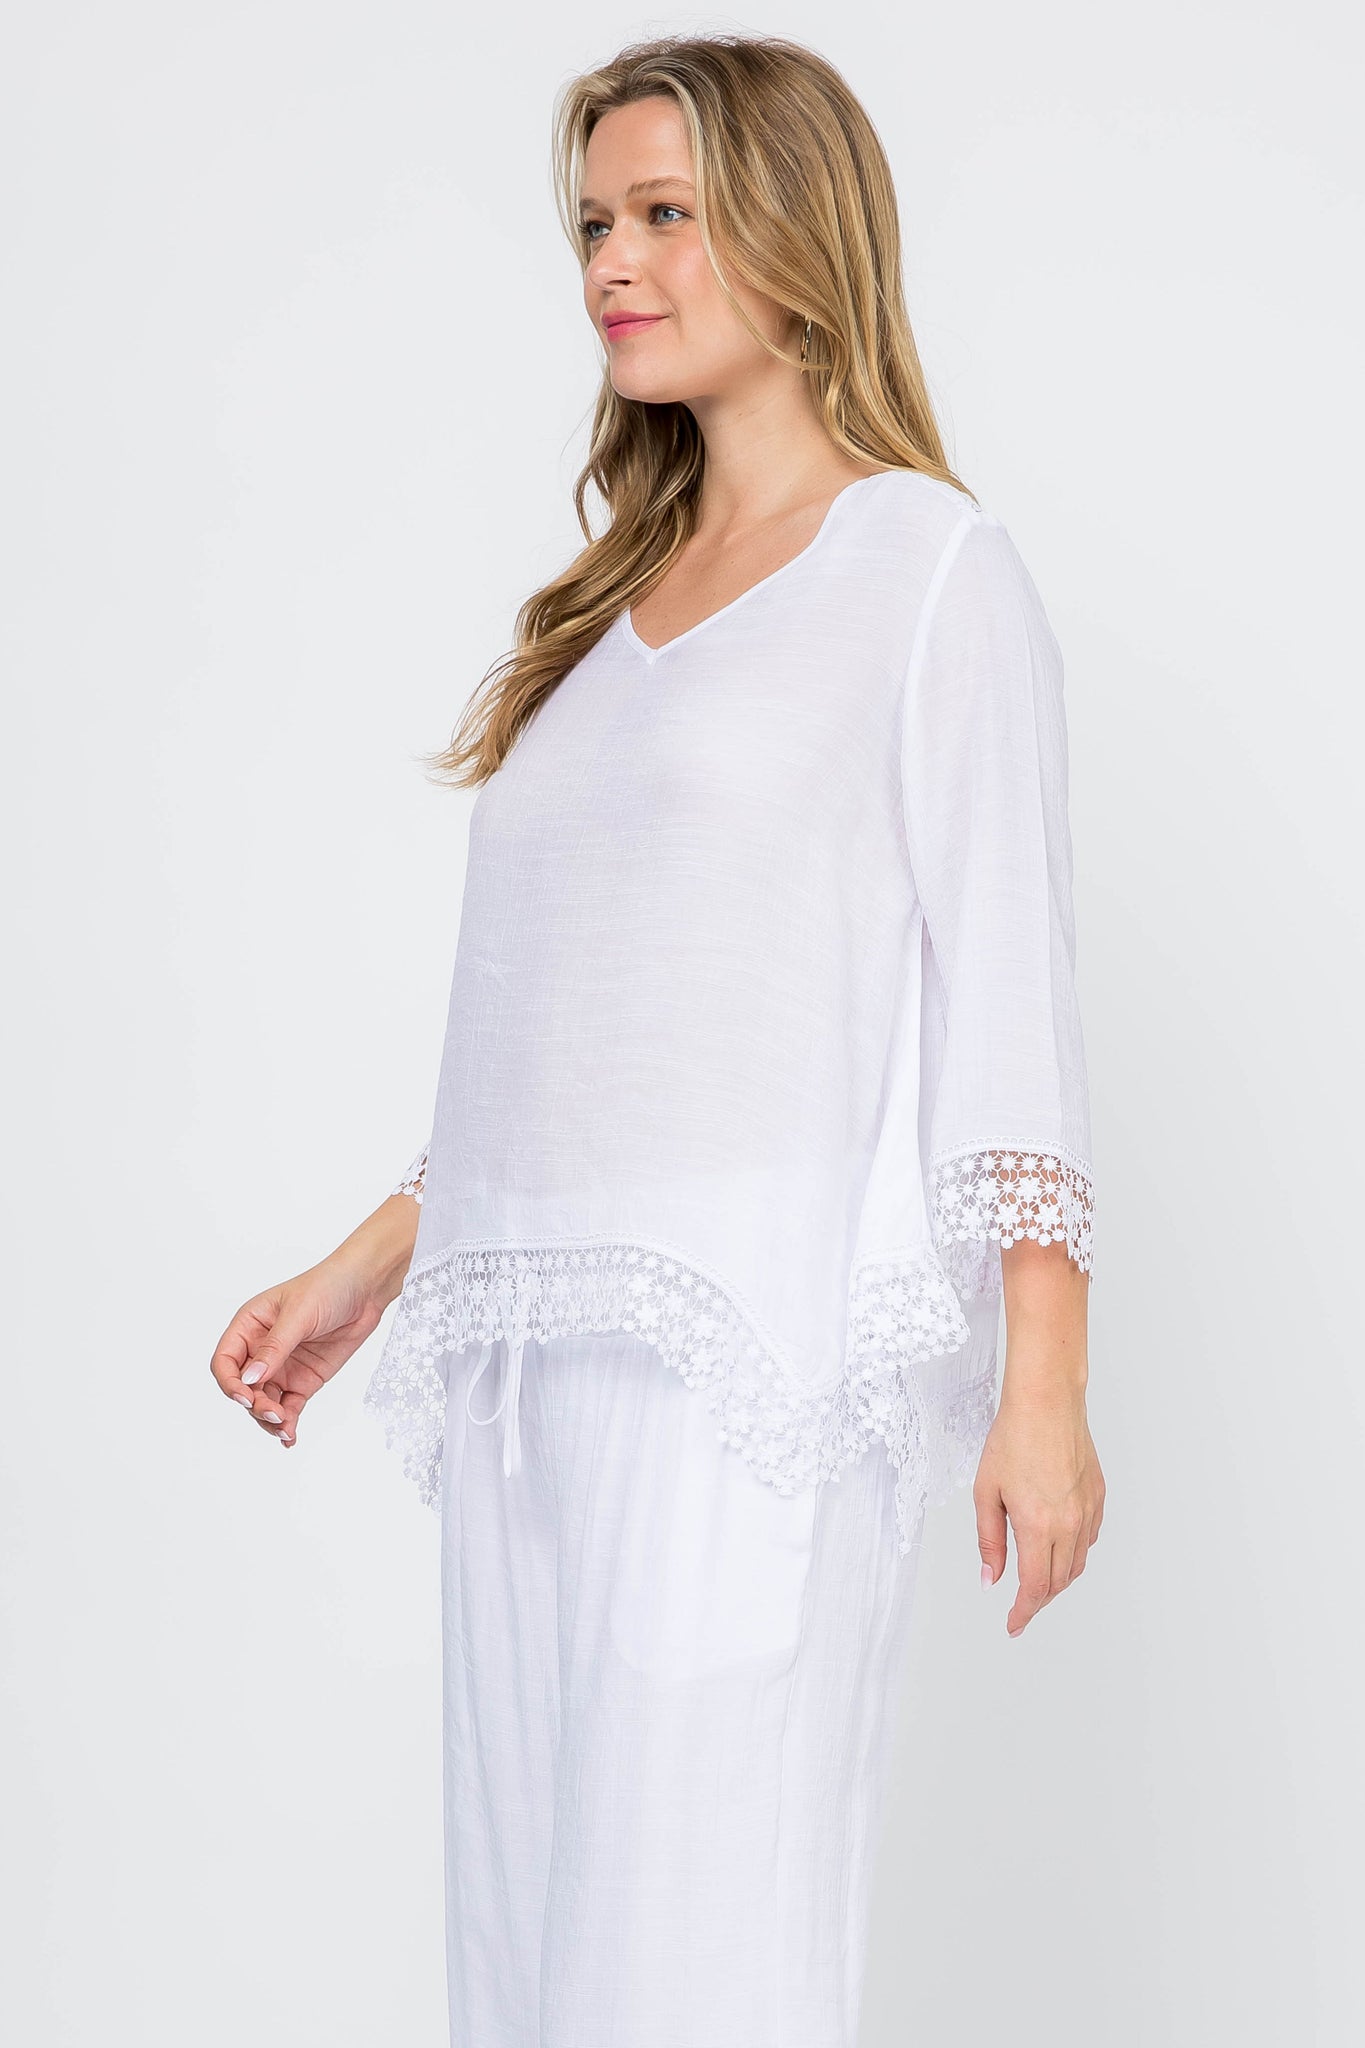 Women's Casual V Neck ¾ Sleeve Crochet Trimmed Shark Bite Hem Tunic Top - Mojito Collection - Vacation Clothing, Women's Clothing, Women's Resort Wear, Women's Top